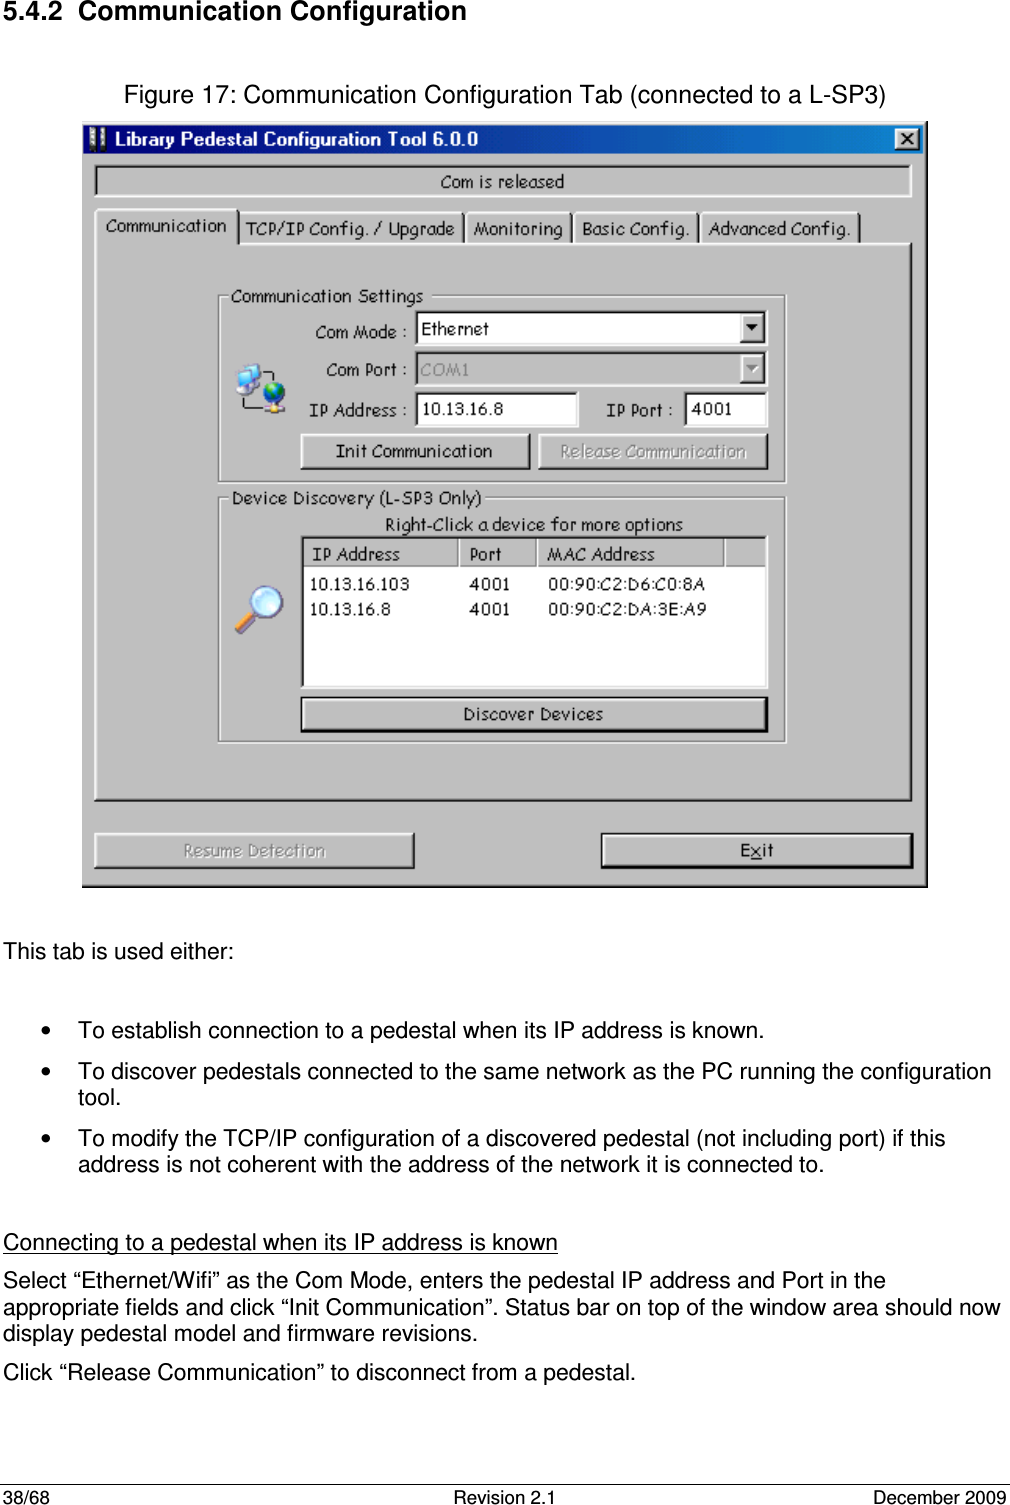  38/68  Revision 2.1  December 2009  5.4.2  Communication Configuration  Figure 17: Communication Configuration Tab (connected to a L-SP3)   This tab is used either:  •  To establish connection to a pedestal when its IP address is known. •  To discover pedestals connected to the same network as the PC running the configuration tool. •  To modify the TCP/IP configuration of a discovered pedestal (not including port) if this address is not coherent with the address of the network it is connected to.  Connecting to a pedestal when its IP address is known Select “Ethernet/Wifi” as the Com Mode, enters the pedestal IP address and Port in the appropriate fields and click “Init Communication”. Status bar on top of the window area should now display pedestal model and firmware revisions. Click “Release Communication” to disconnect from a pedestal. 